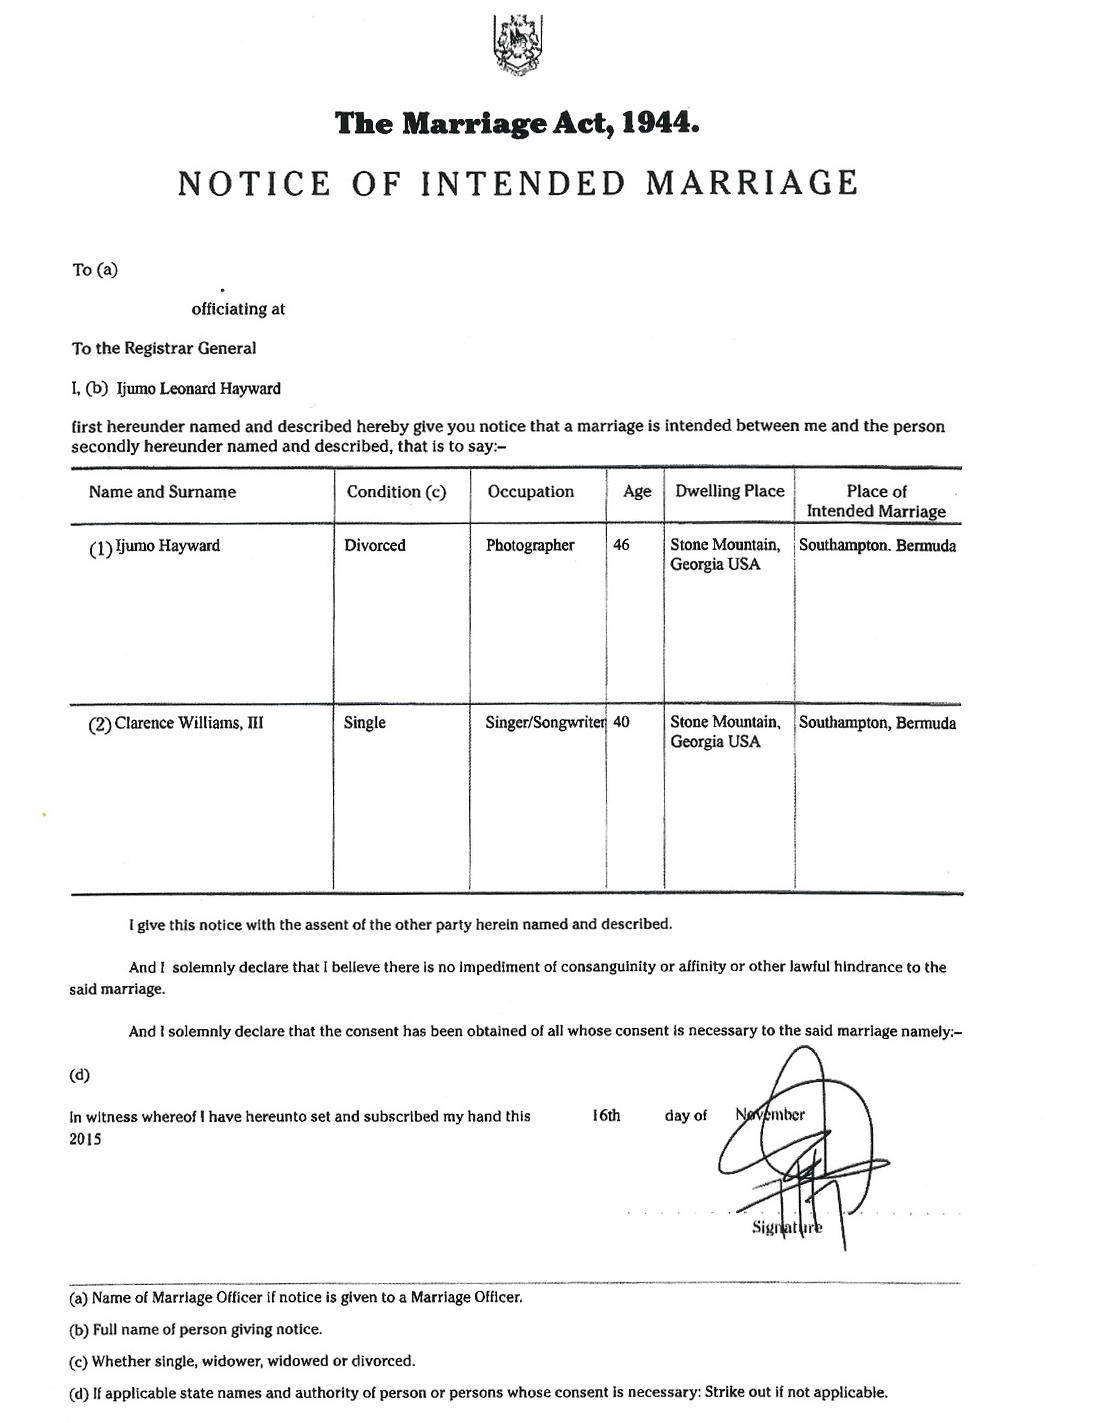 Notice of Intended Marriage Act Nov 2015 (1)